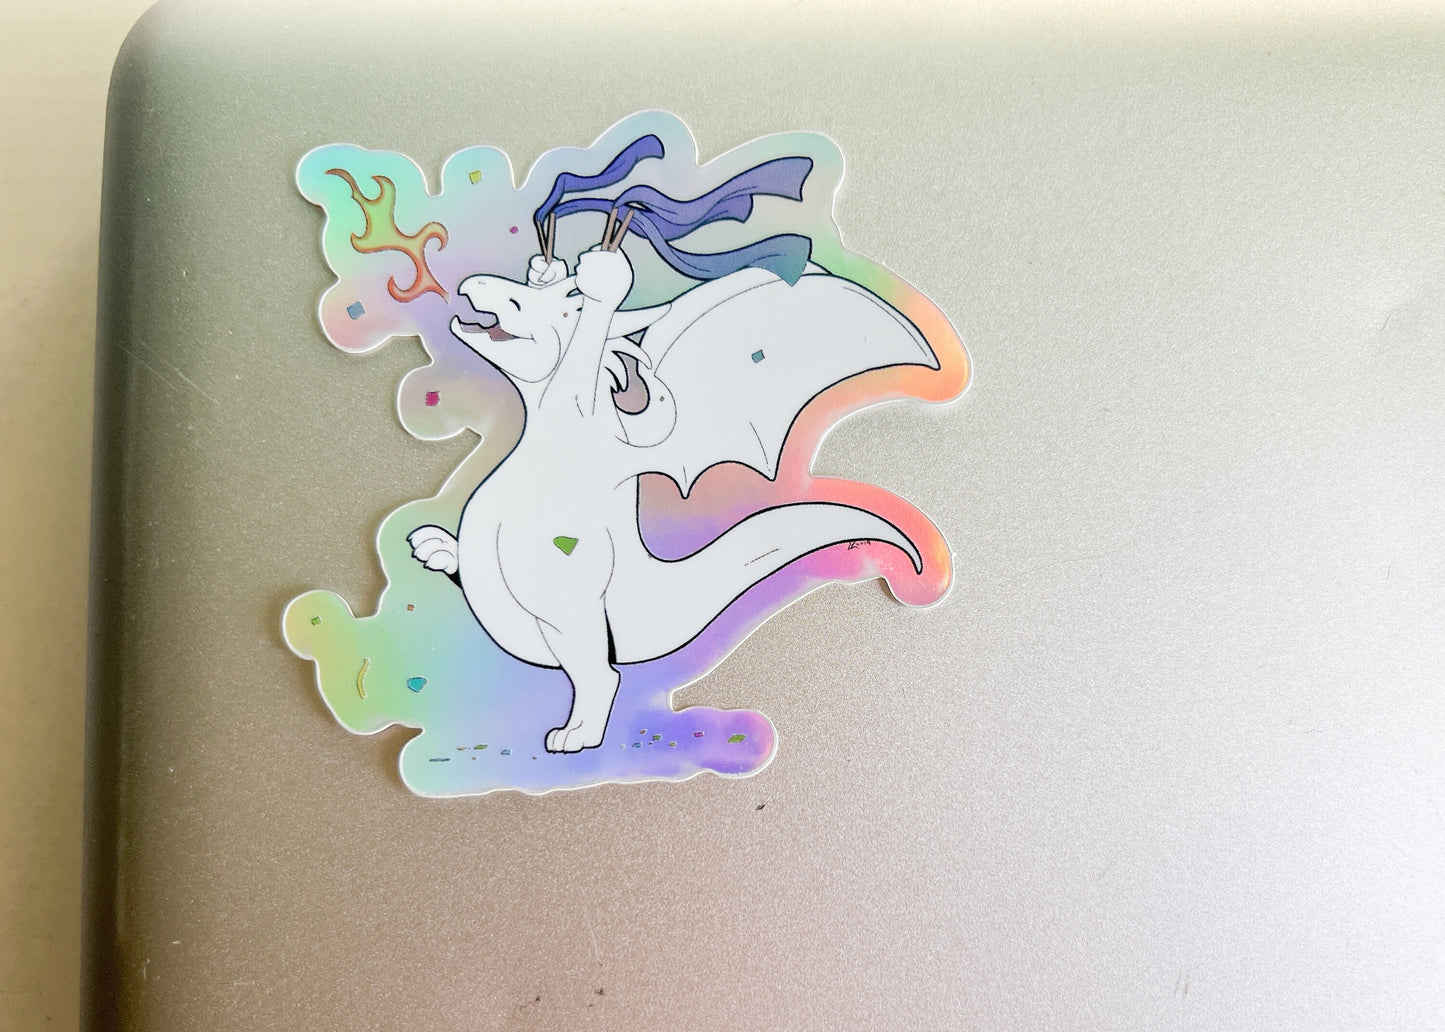 Holographic Dragon Sticker | Iridescent Mythical Fantasy Celebration Decal | Water Bottle Laptop Journal Scrapbook Art | Fairycore Whimsical